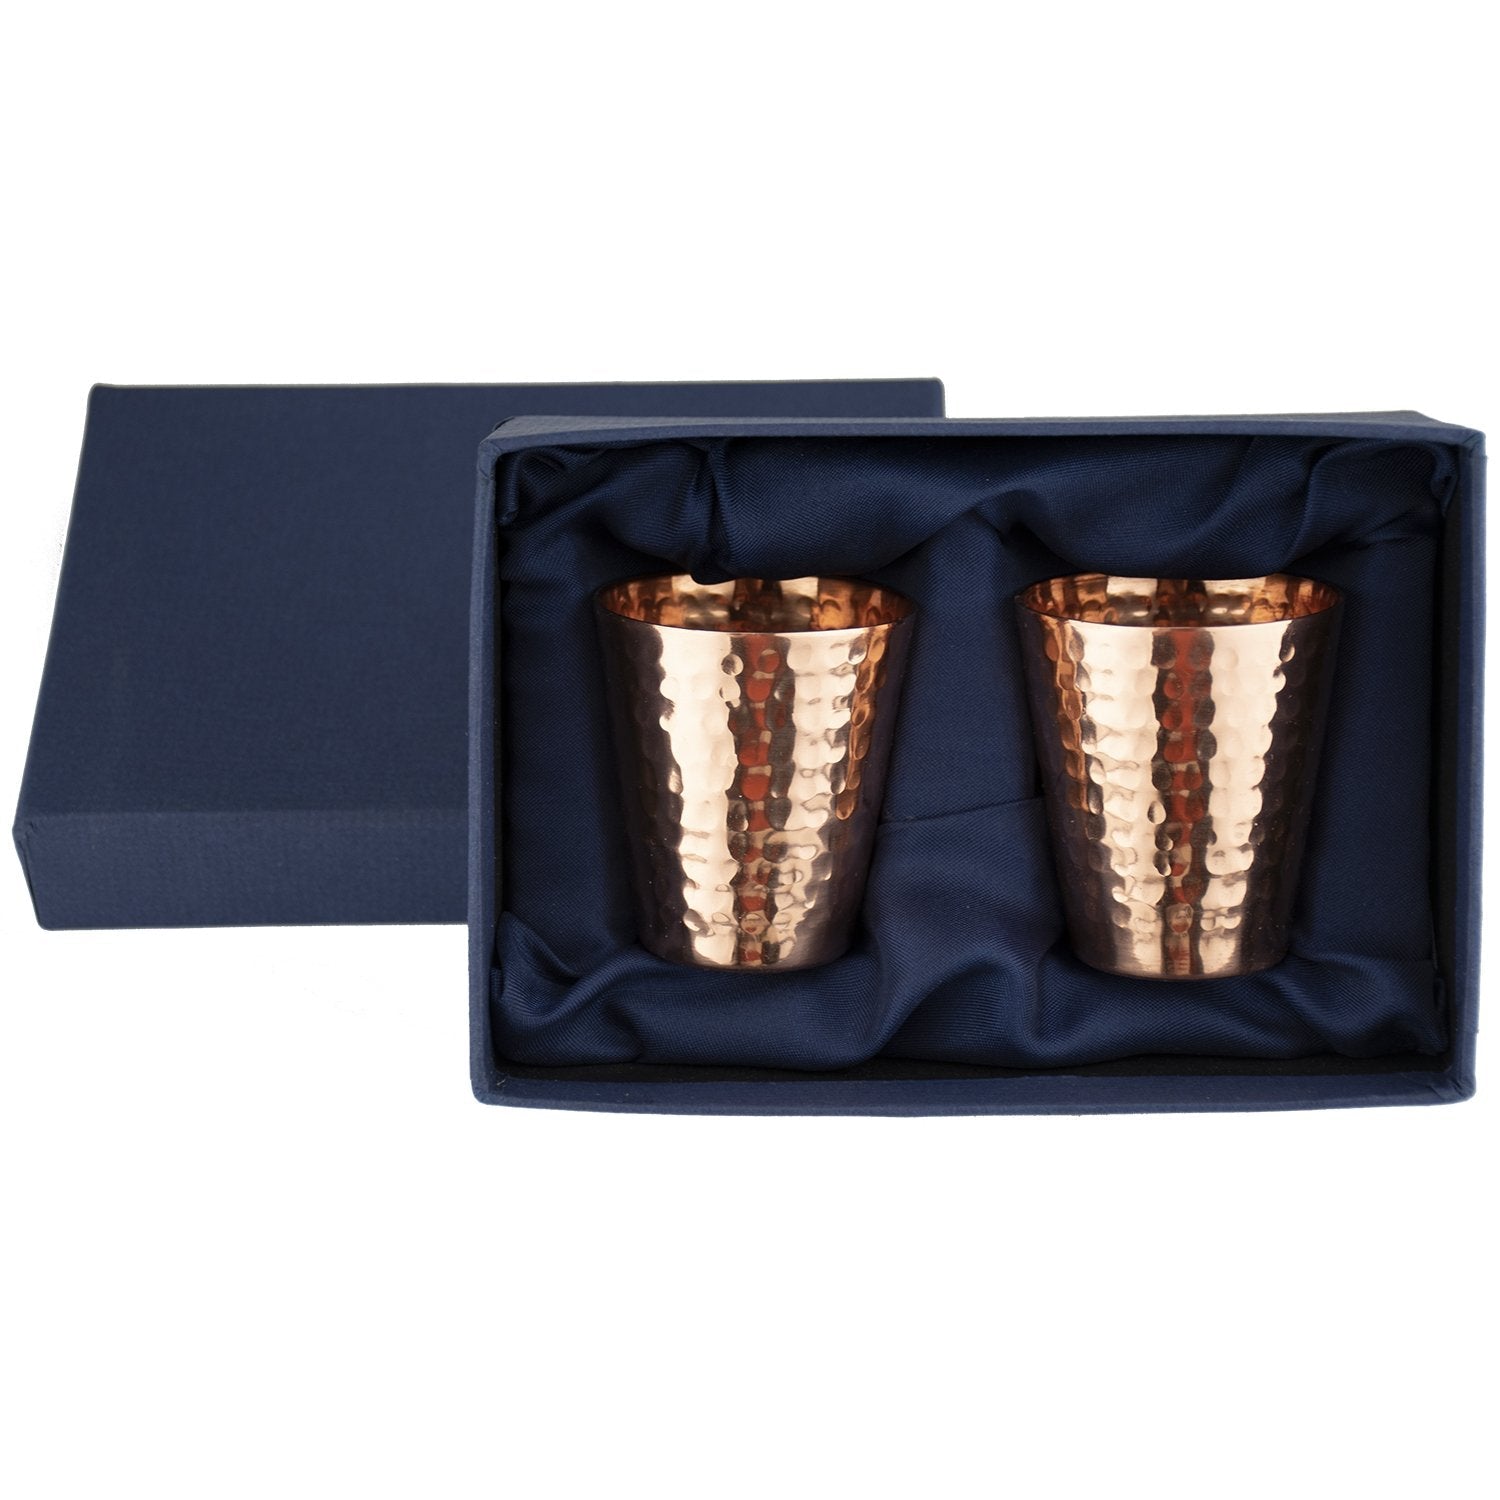 Prince of Scots Hammered Copper Shot Glasses (Set of 2)-Barware-Prince of Scots-810032751654, CopperShot-1-Prince of Scots